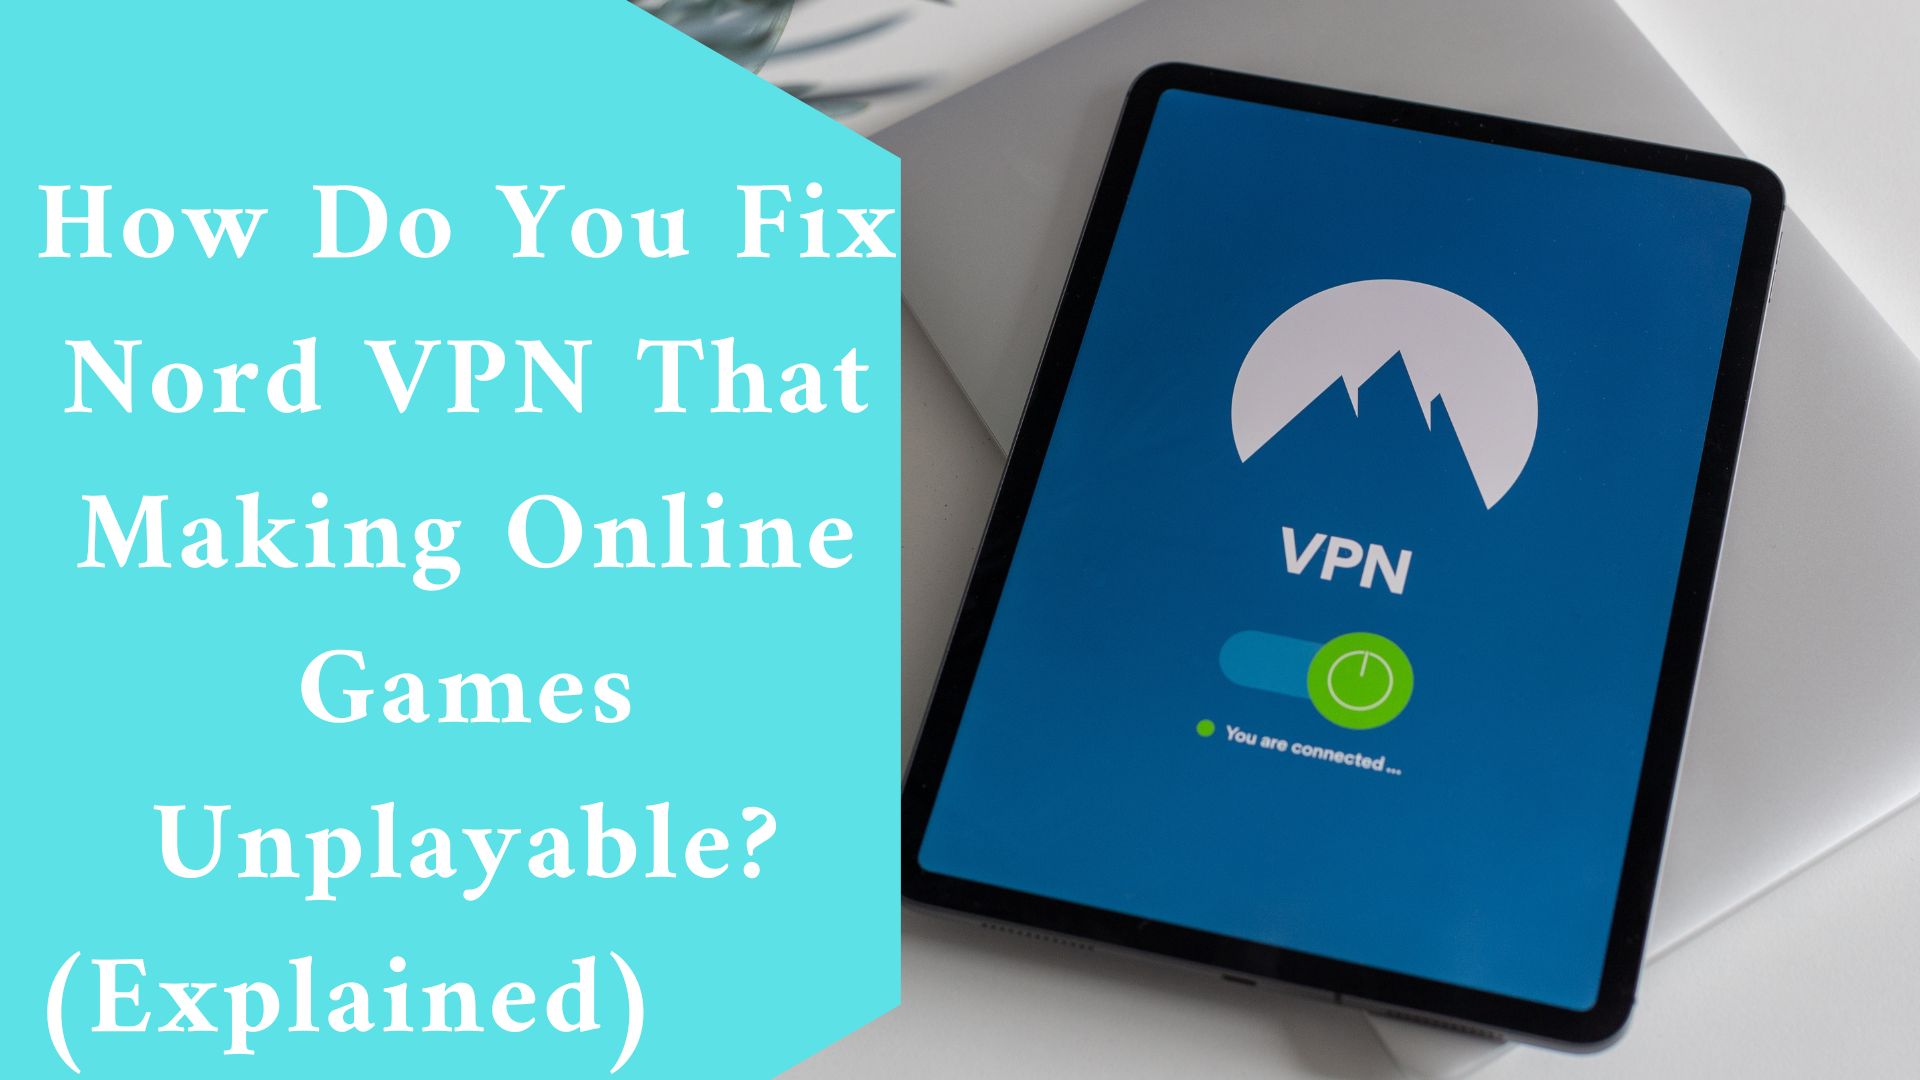 How Do You Fix Nord VPN That Making Online Games Unplayable? (Explained)